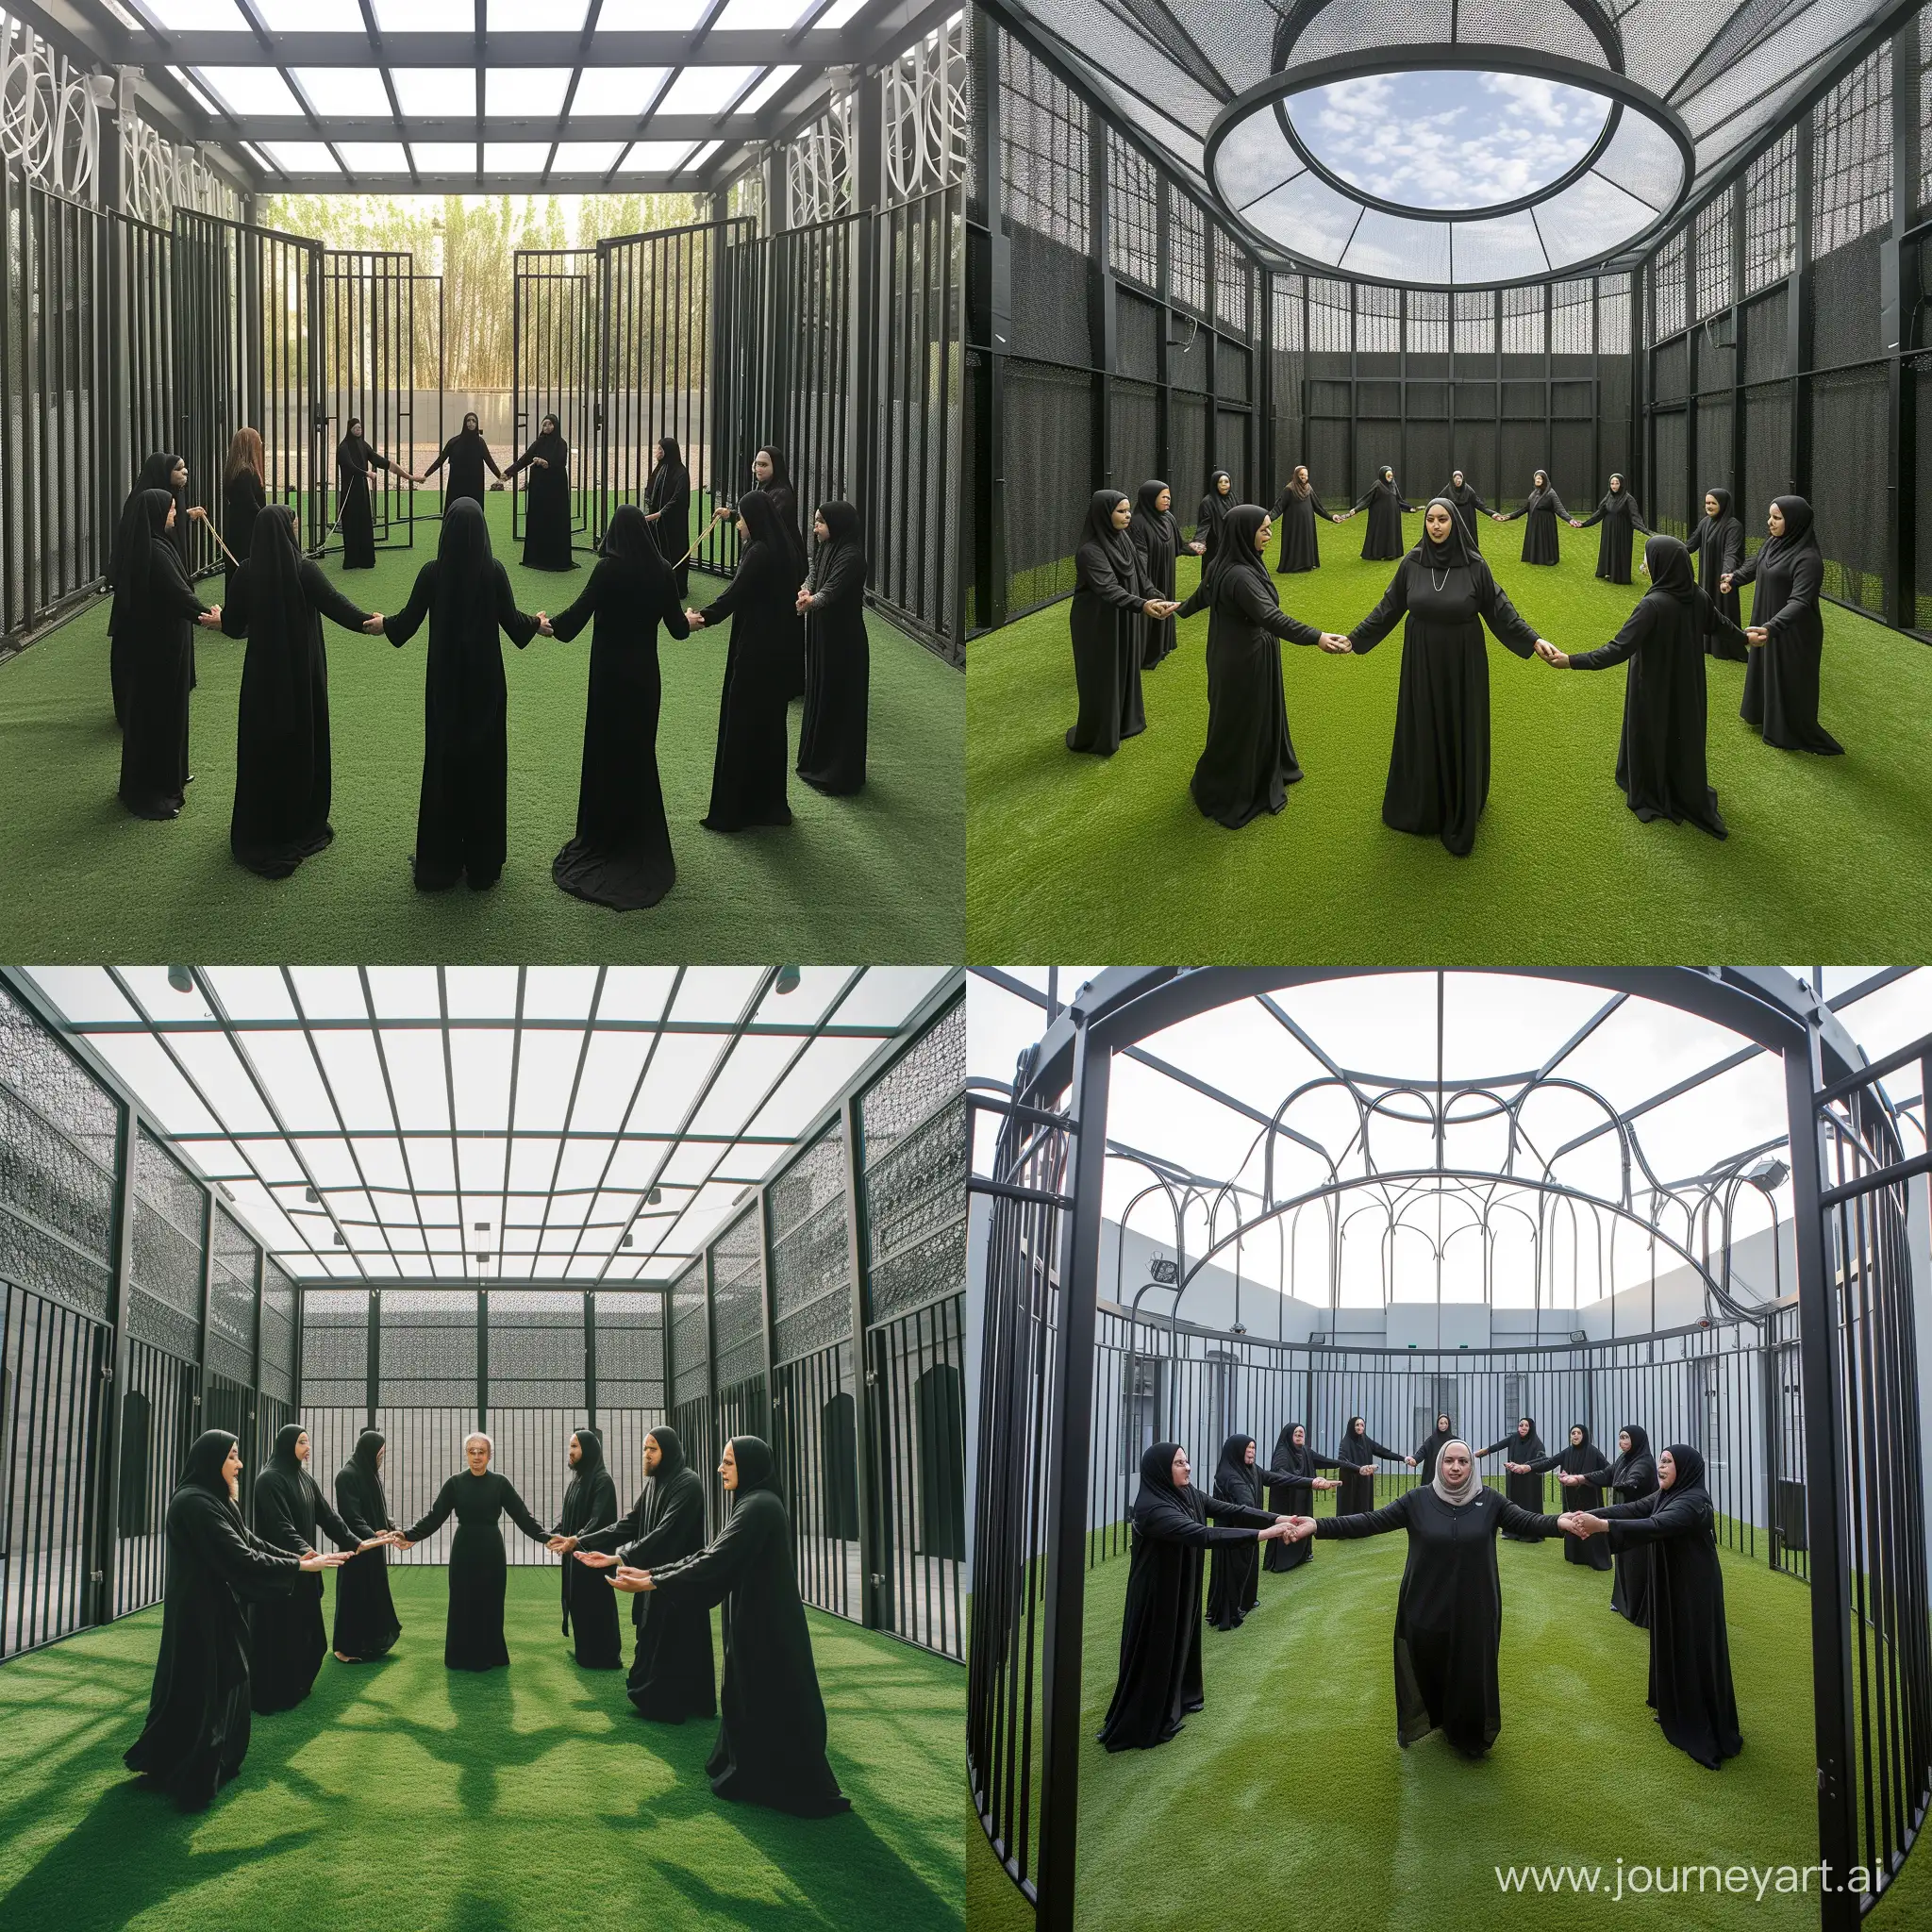 individual of caucasian descent abut 10 of them are dressed in black as muslims stand holding hands in a round circle. on astroturf with gates around them but open roof to sky